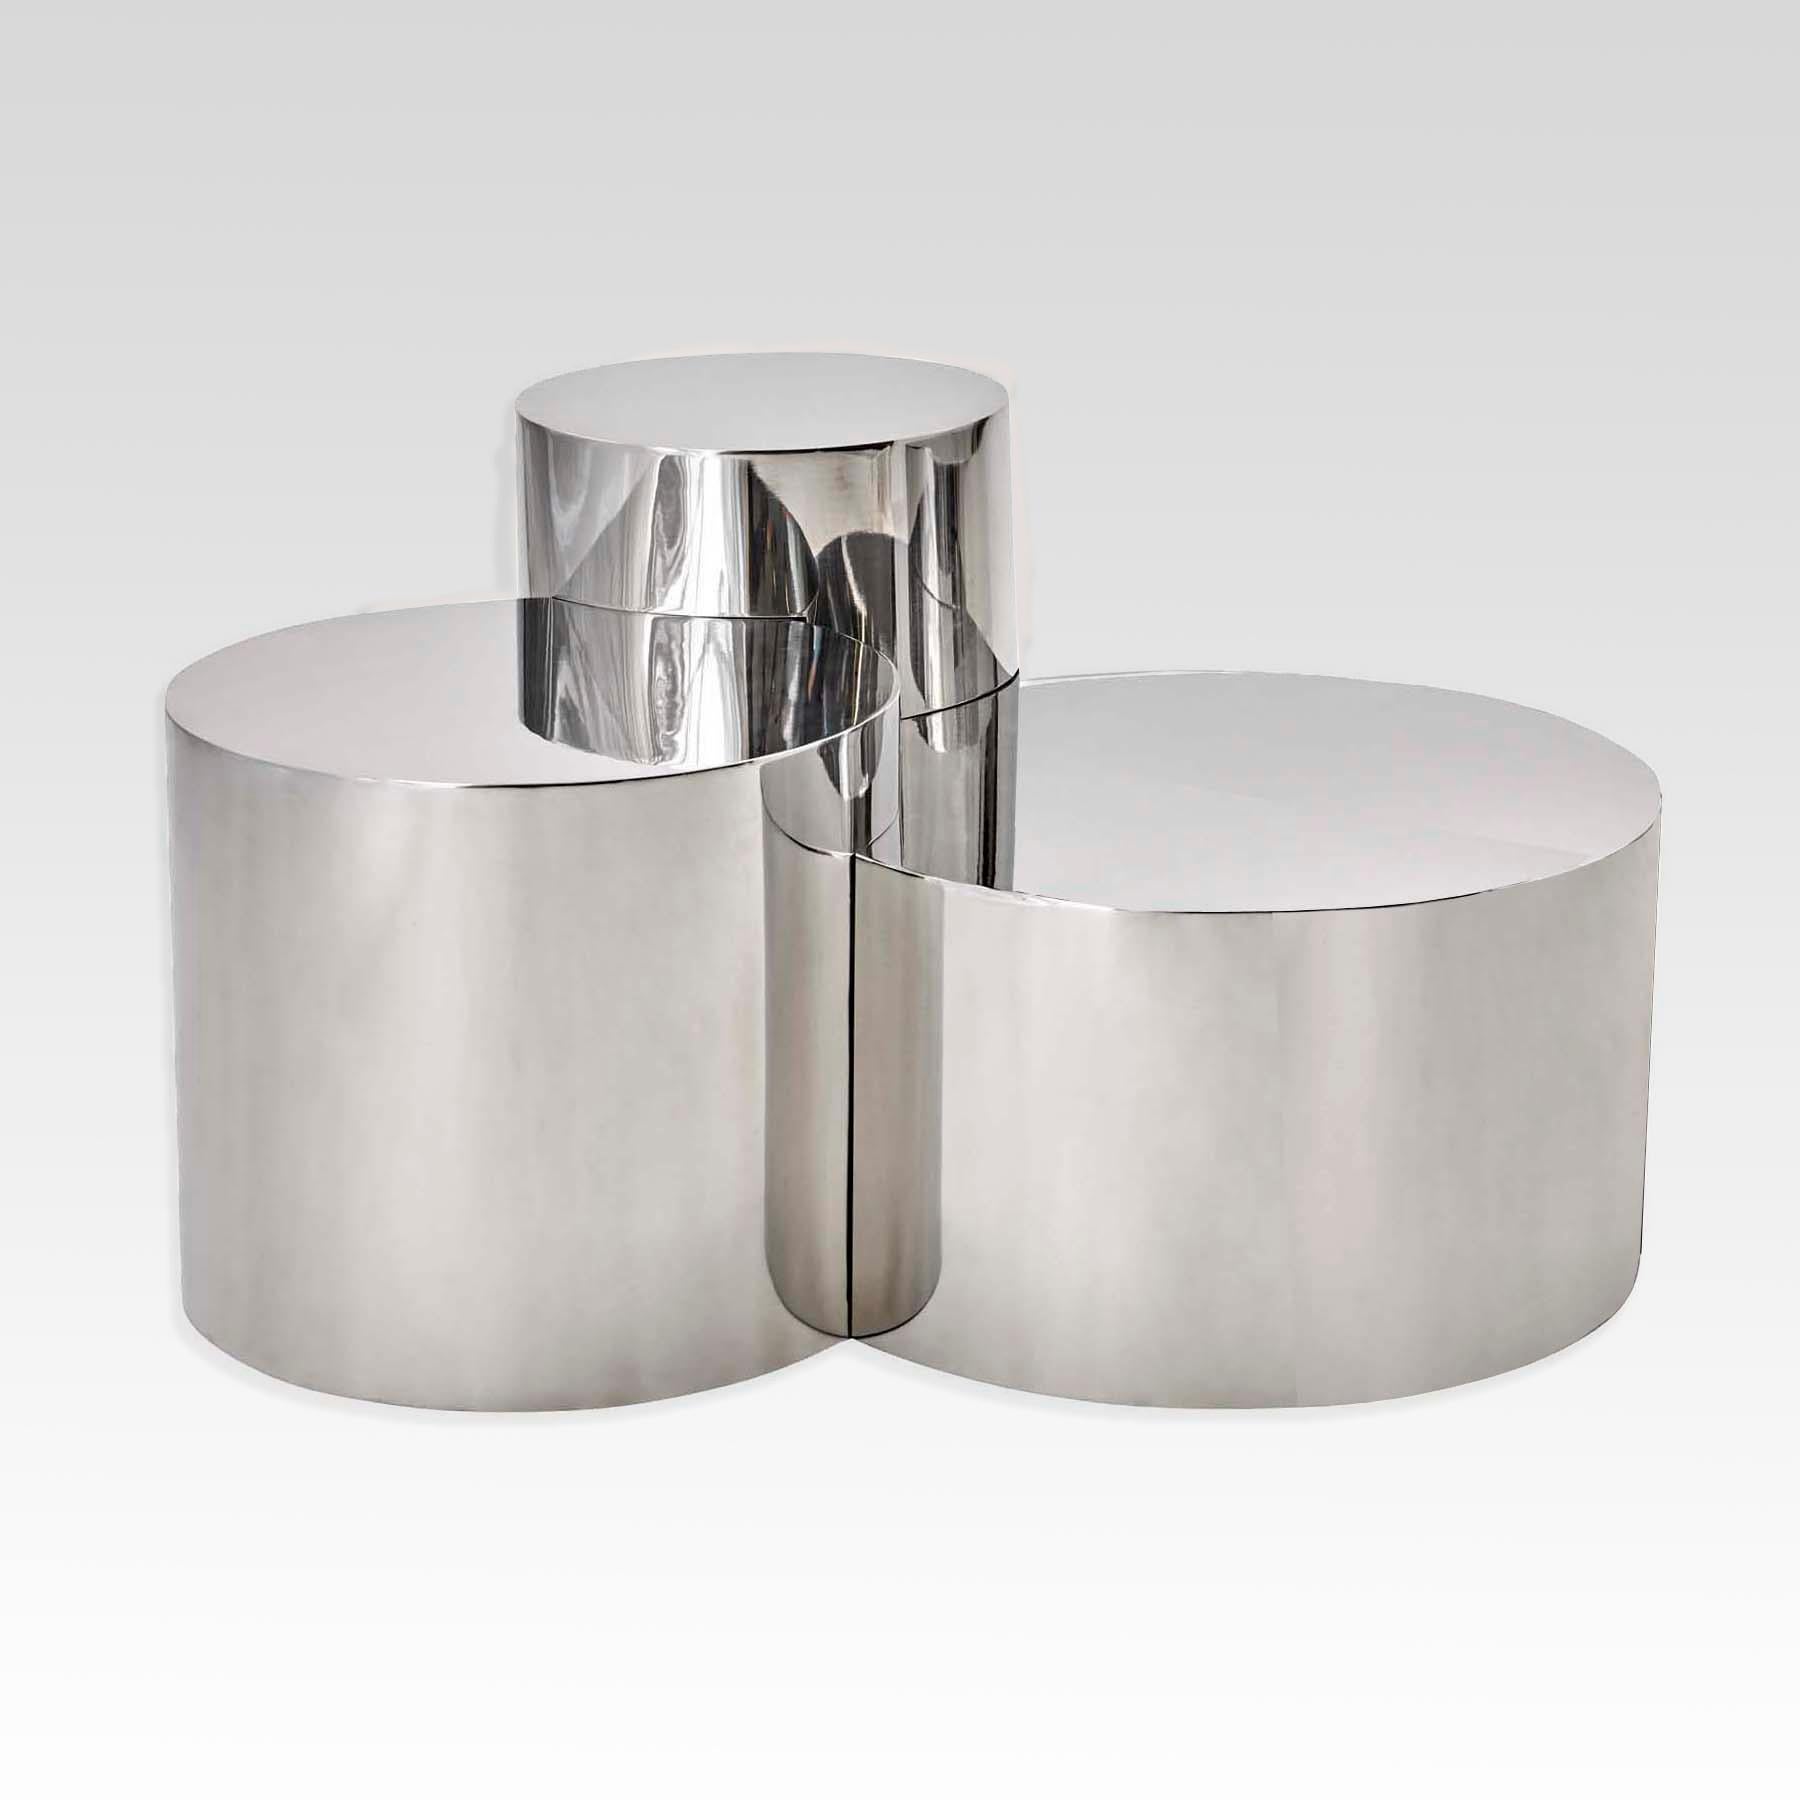 The Geometria: Cerchi 4 table elevates the minimalist form of the cylinder by joining and overlapping them to create a highly sculptural piece. Shown in polished steel with four cylinders.

Customization Options:
Each piece is hand crafted in Italy